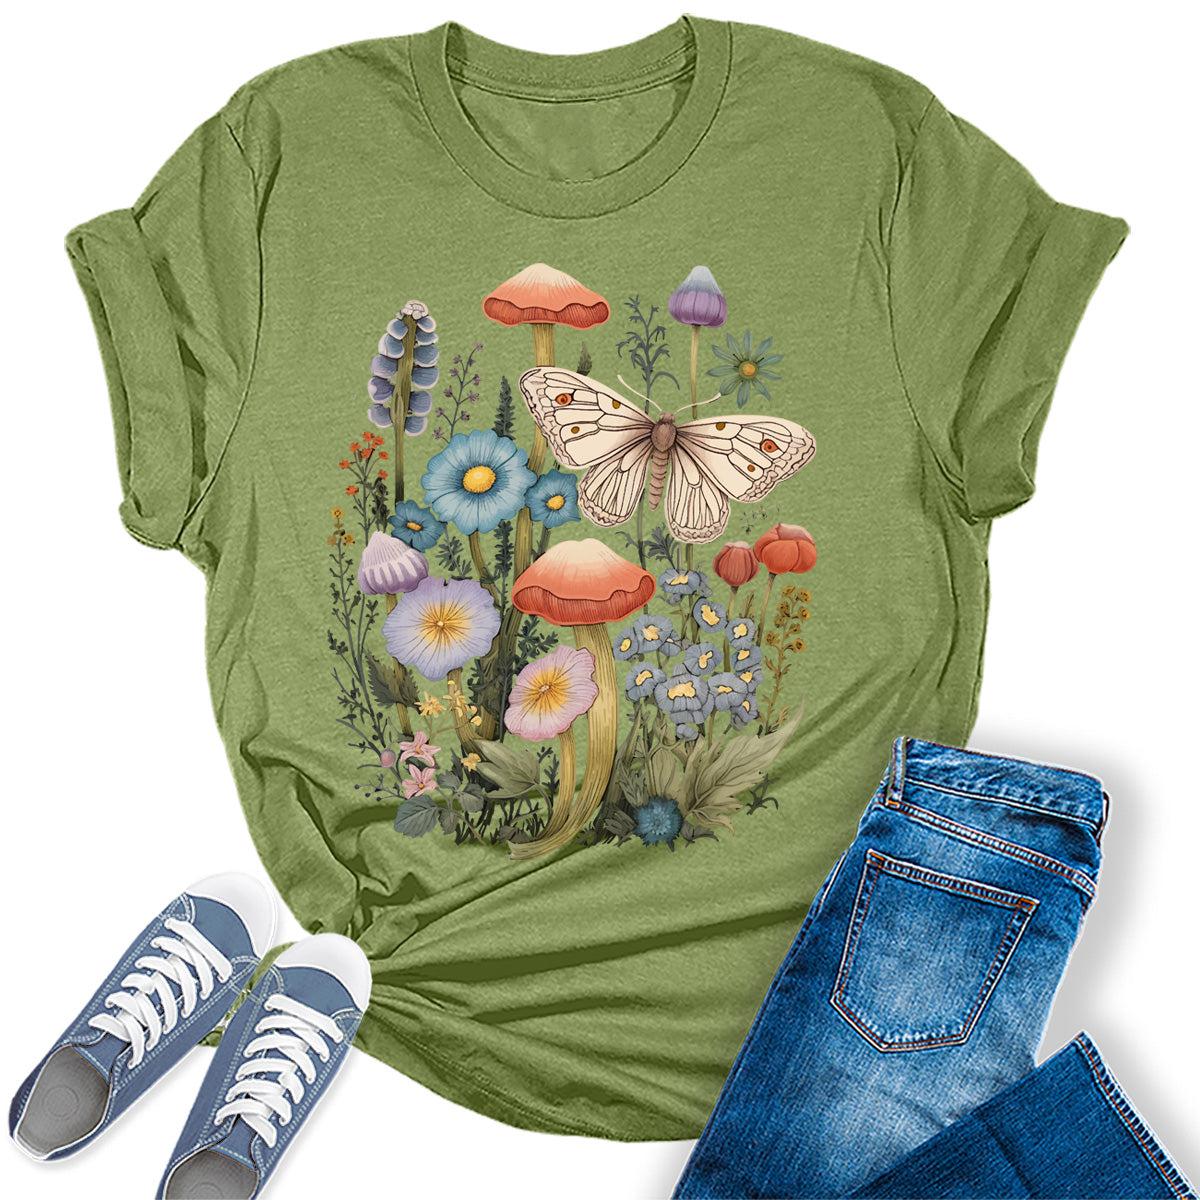 Cute Aesthetic Cottagecore Butterfly Mushroom Graphic Tees for Women